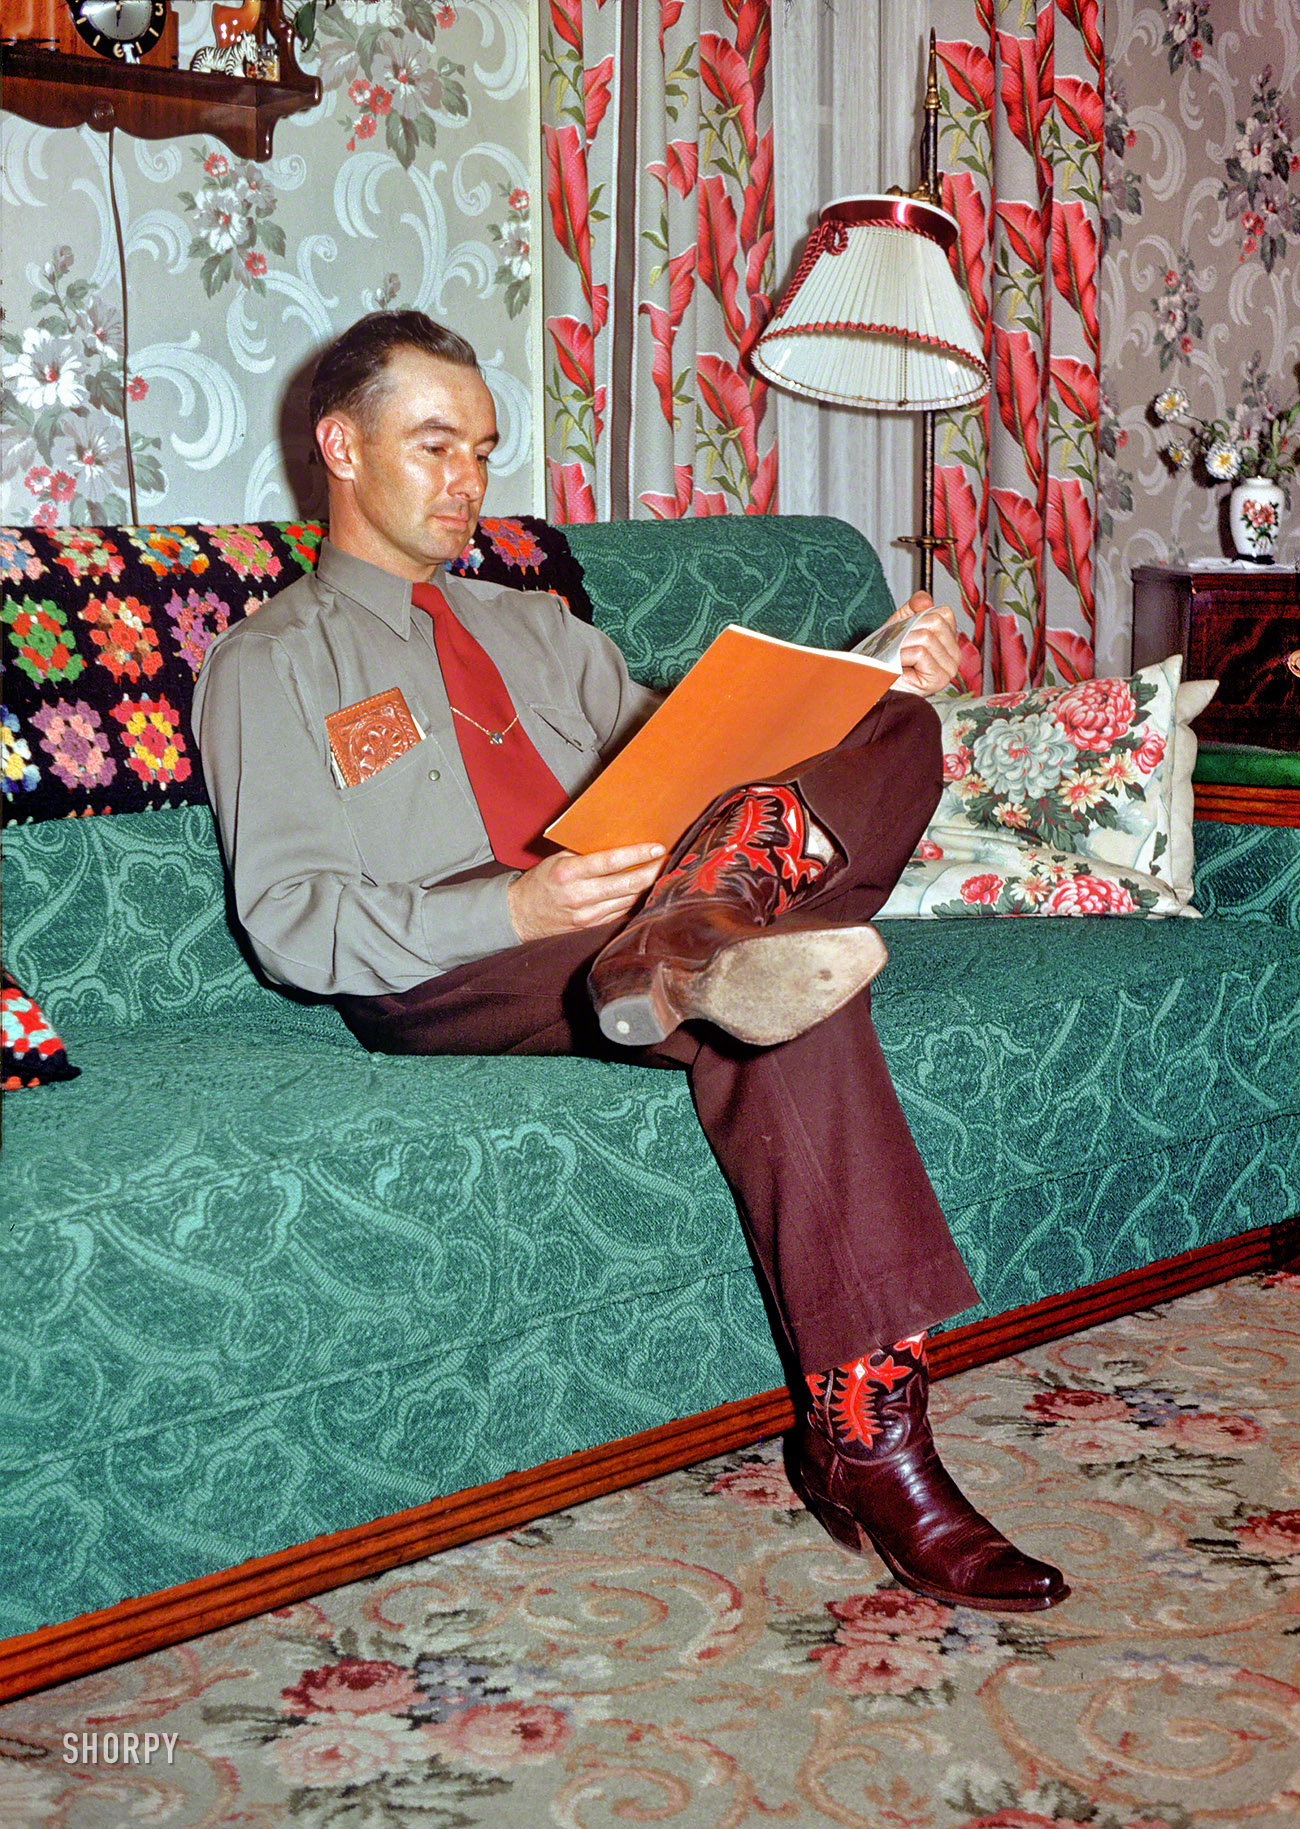 "Leslie, 28 Feb. 1952." Visiting the abode of Grace and Hubert, whose low-key decor whispers of subdued scarlets and tentative teals. View full size.